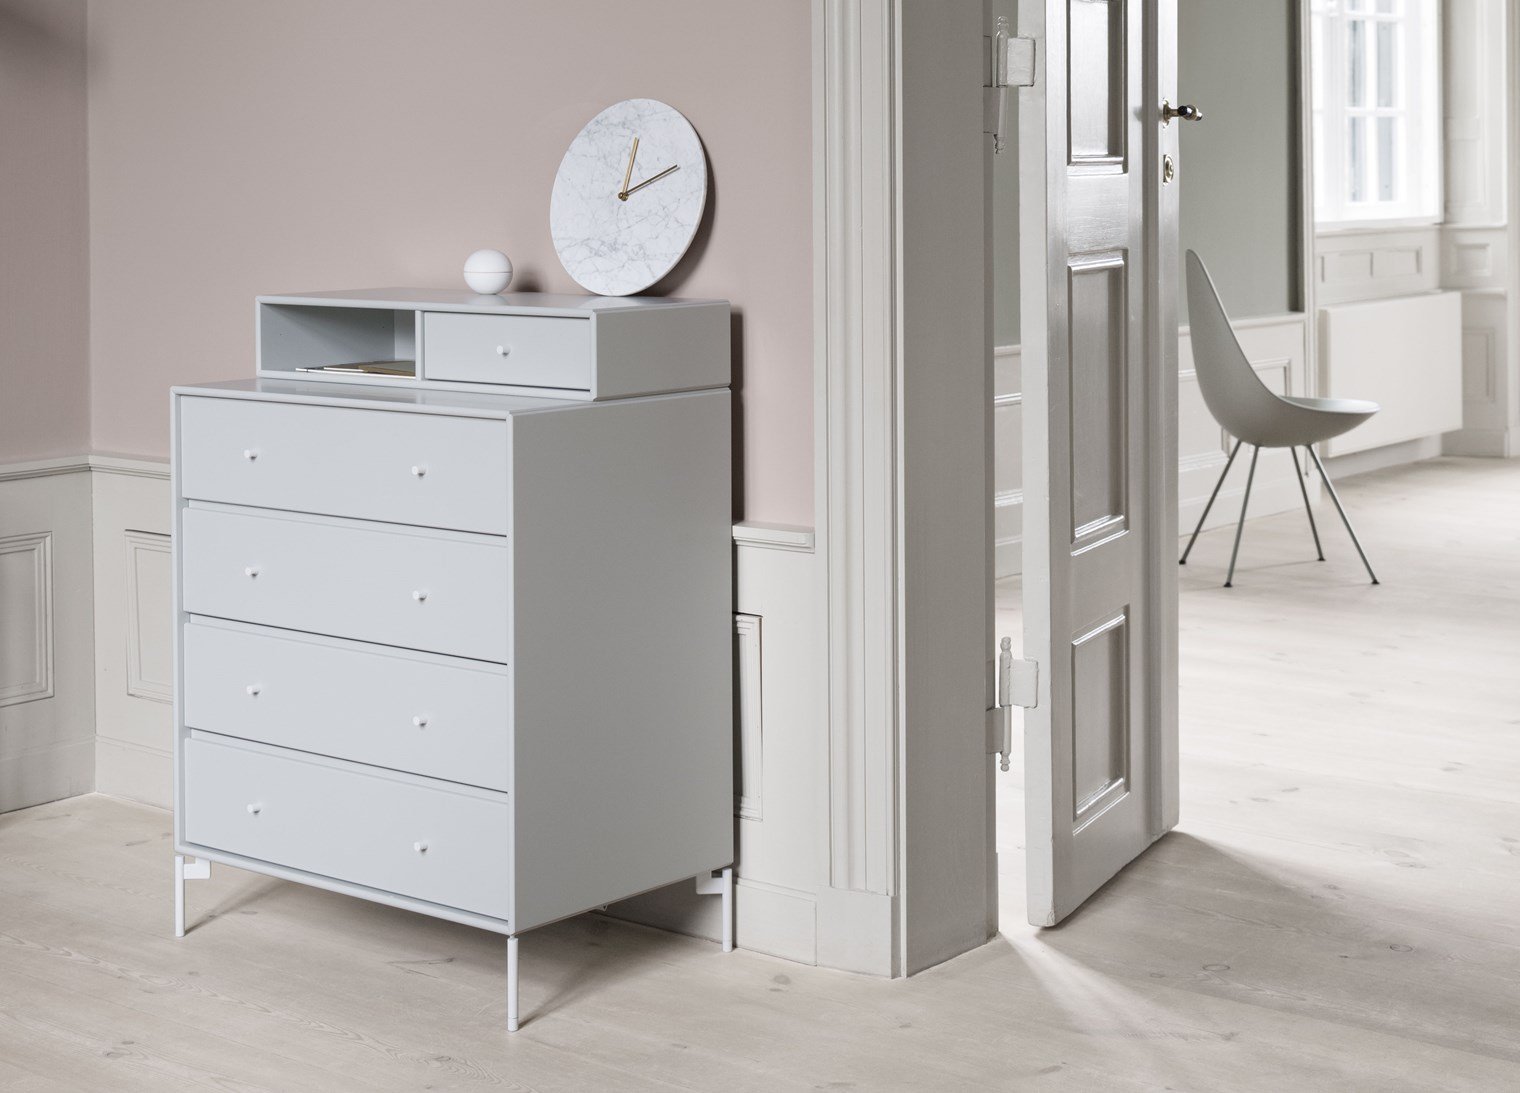 Montana Keep Chest Of Drawers With Suspension Rail, Fjord